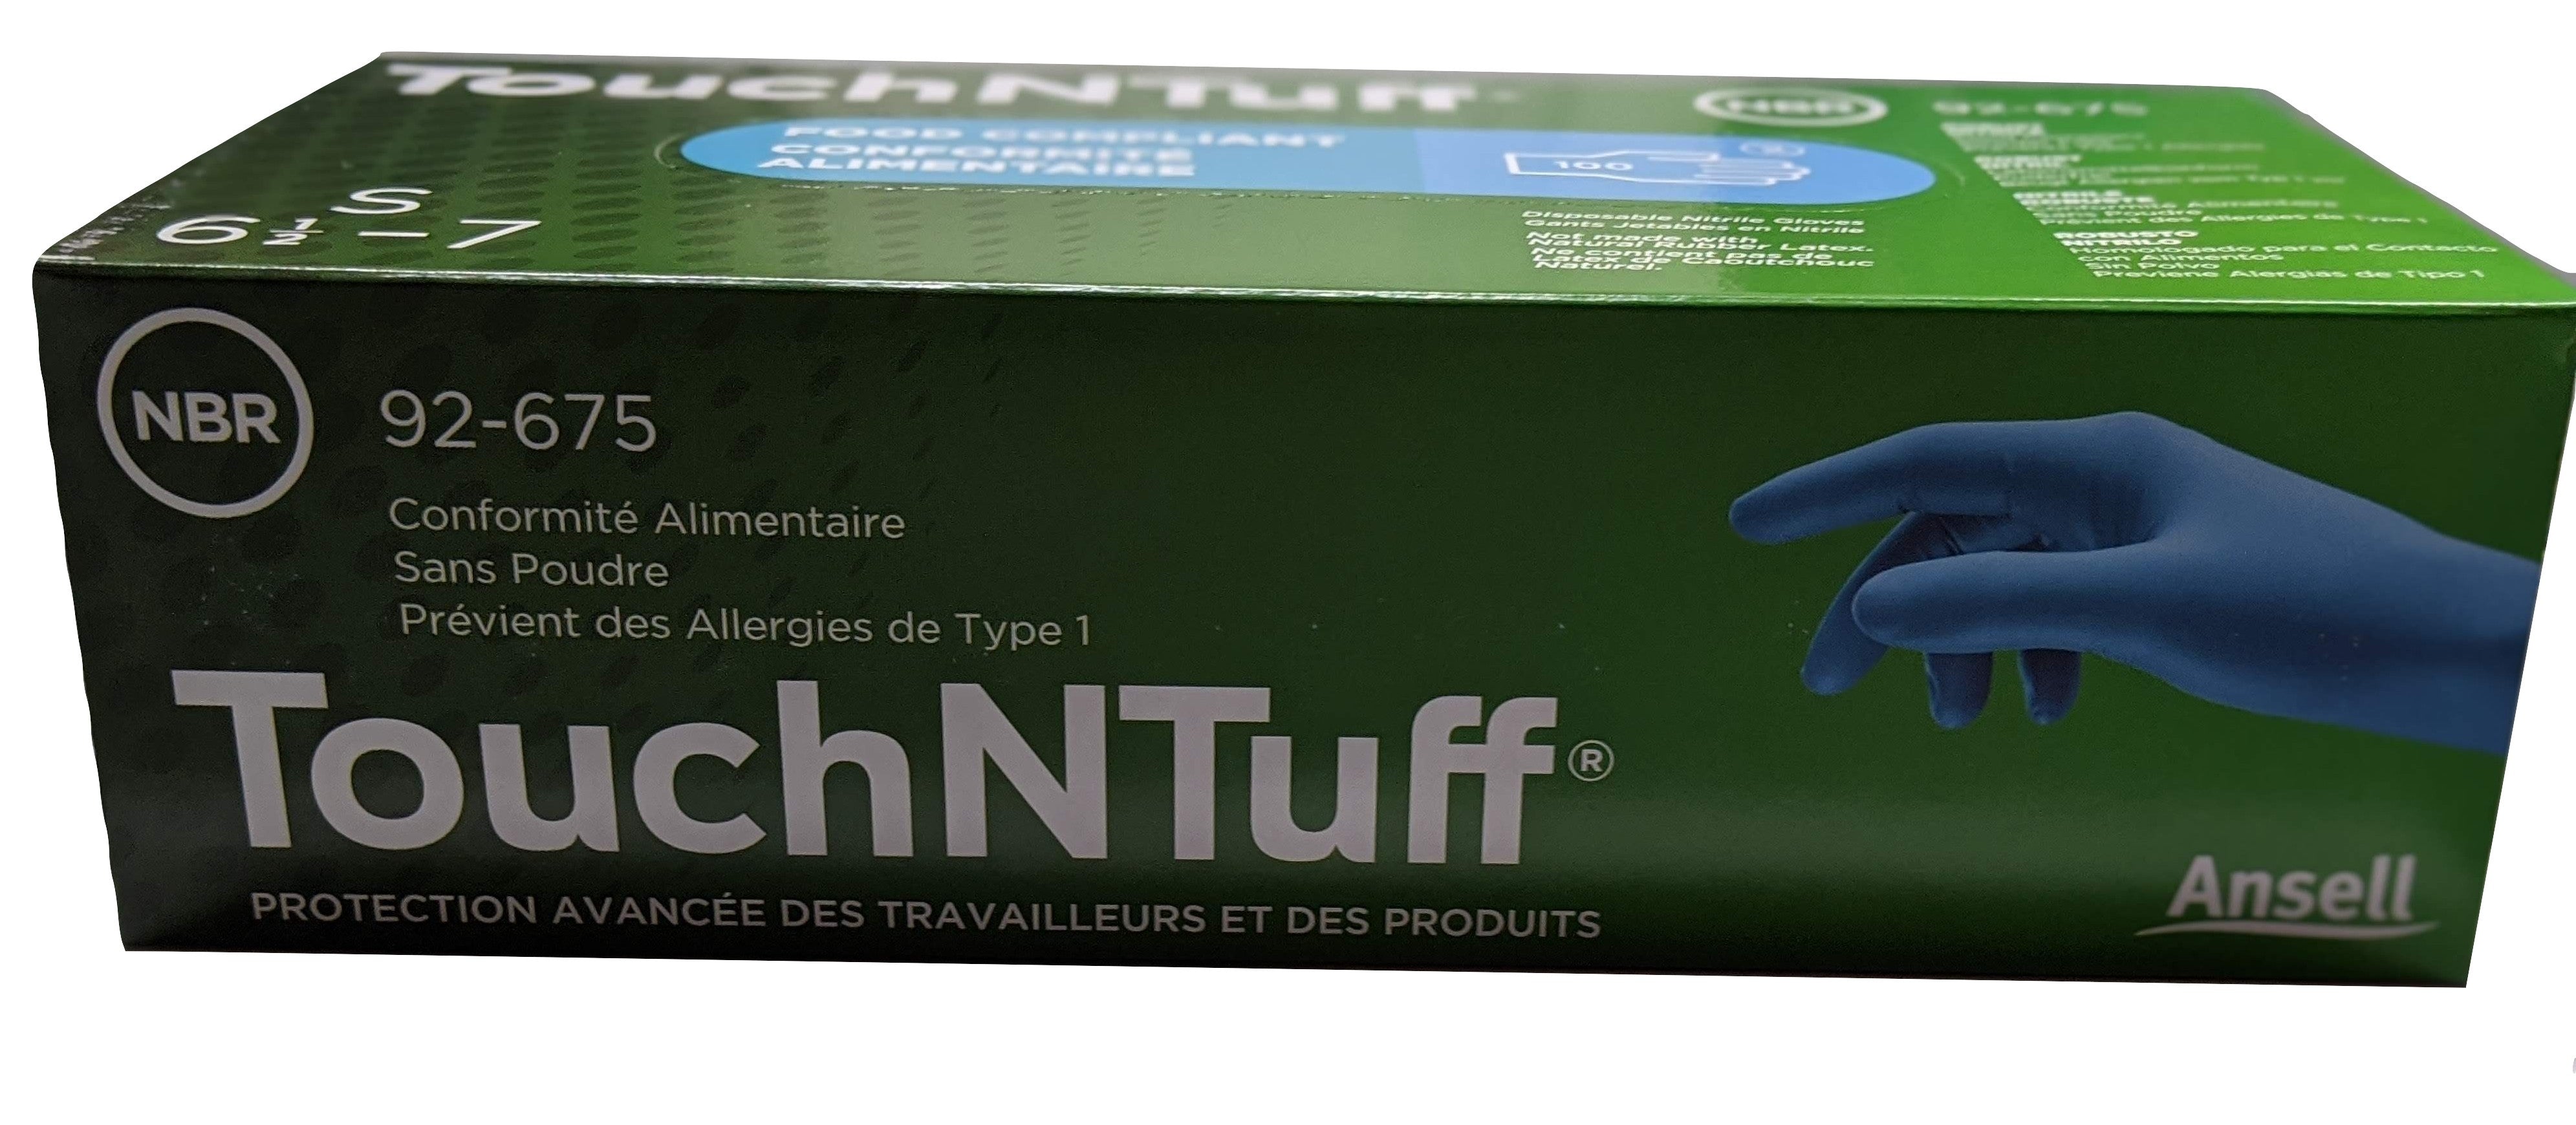 ANSELL TouchNTuff 92-675 Blue Nitrile powder free disposable gloves, Box of 100